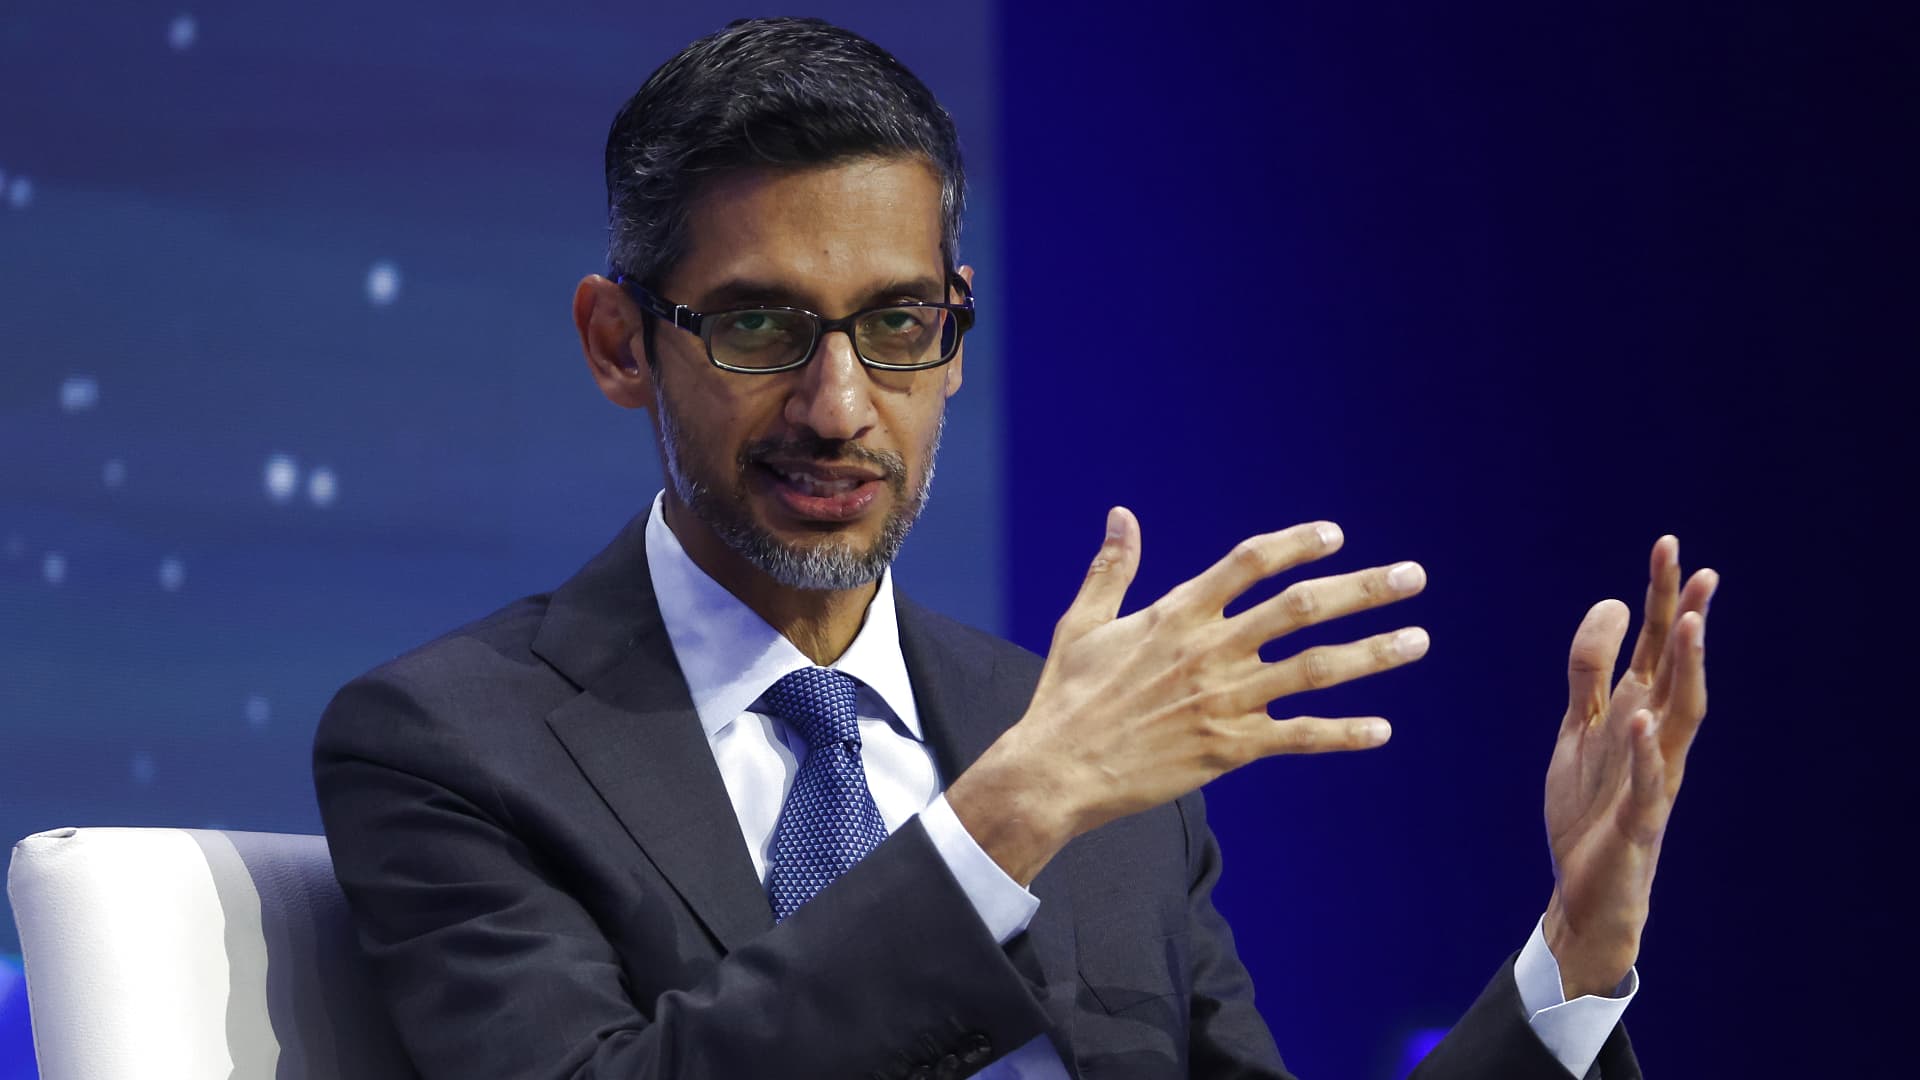 AI can 'disproportionately' help defend against cybersecurity threats, Google CEO Sundar Pichai says